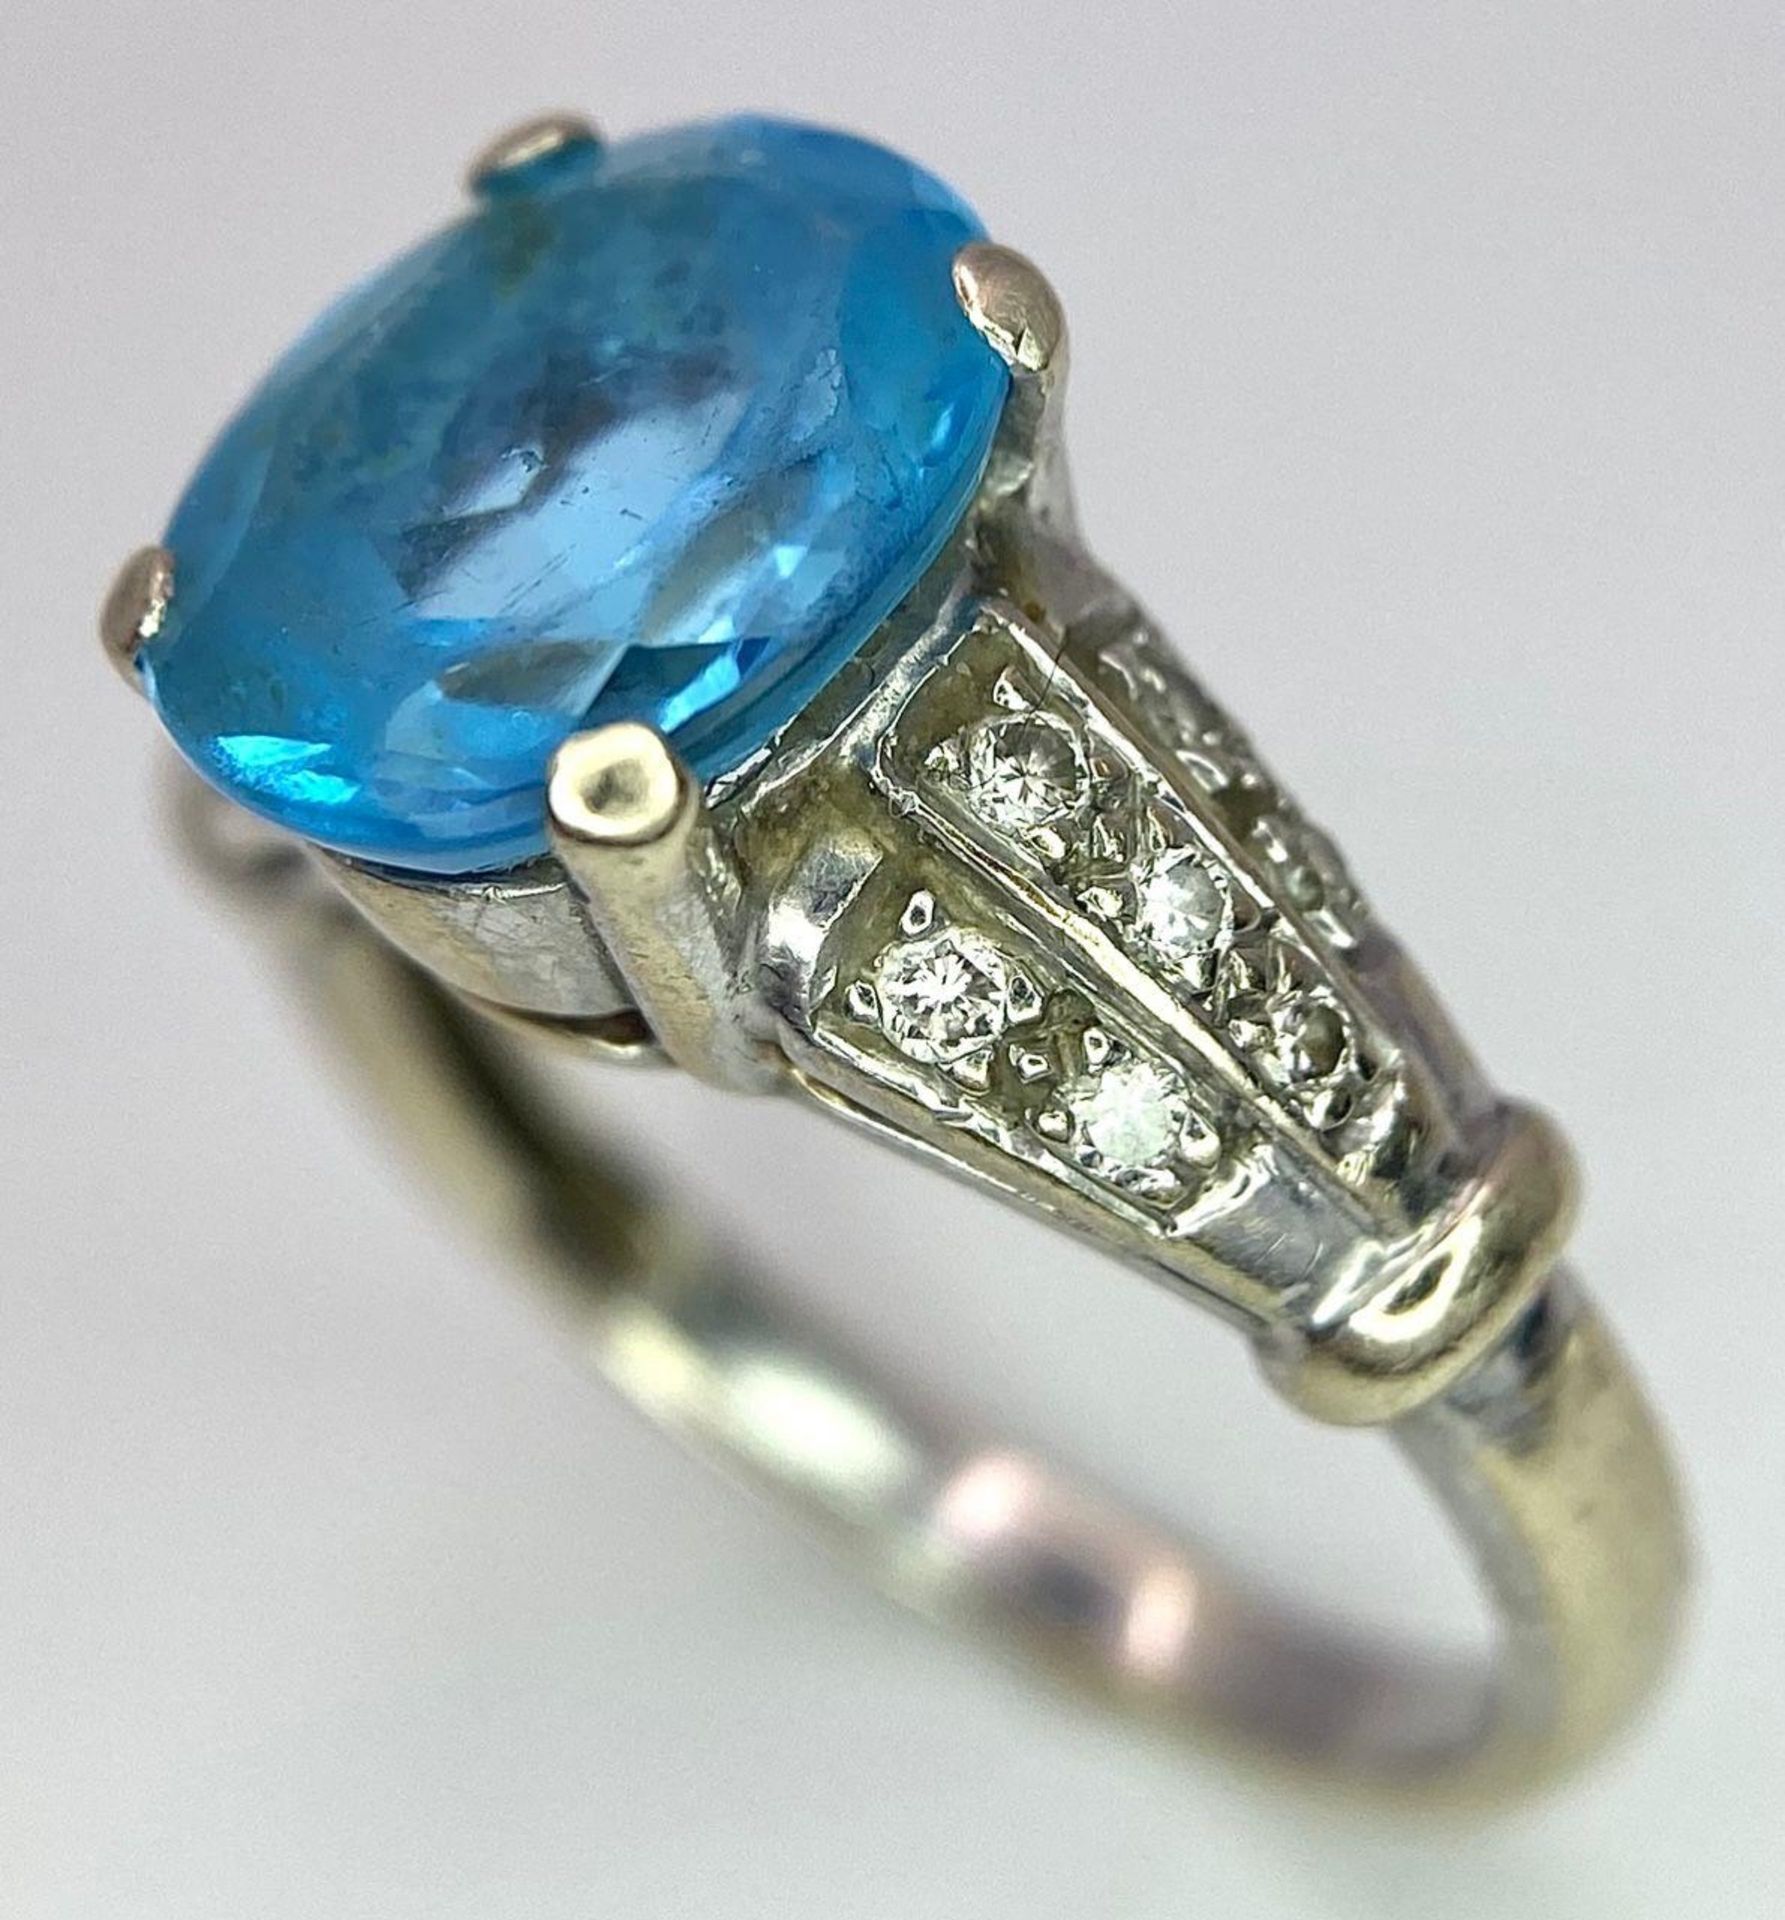 A vintage, 9 K white gold ring with a large, oval cut, vivid blue aquamarine and three bands of - Image 3 of 5